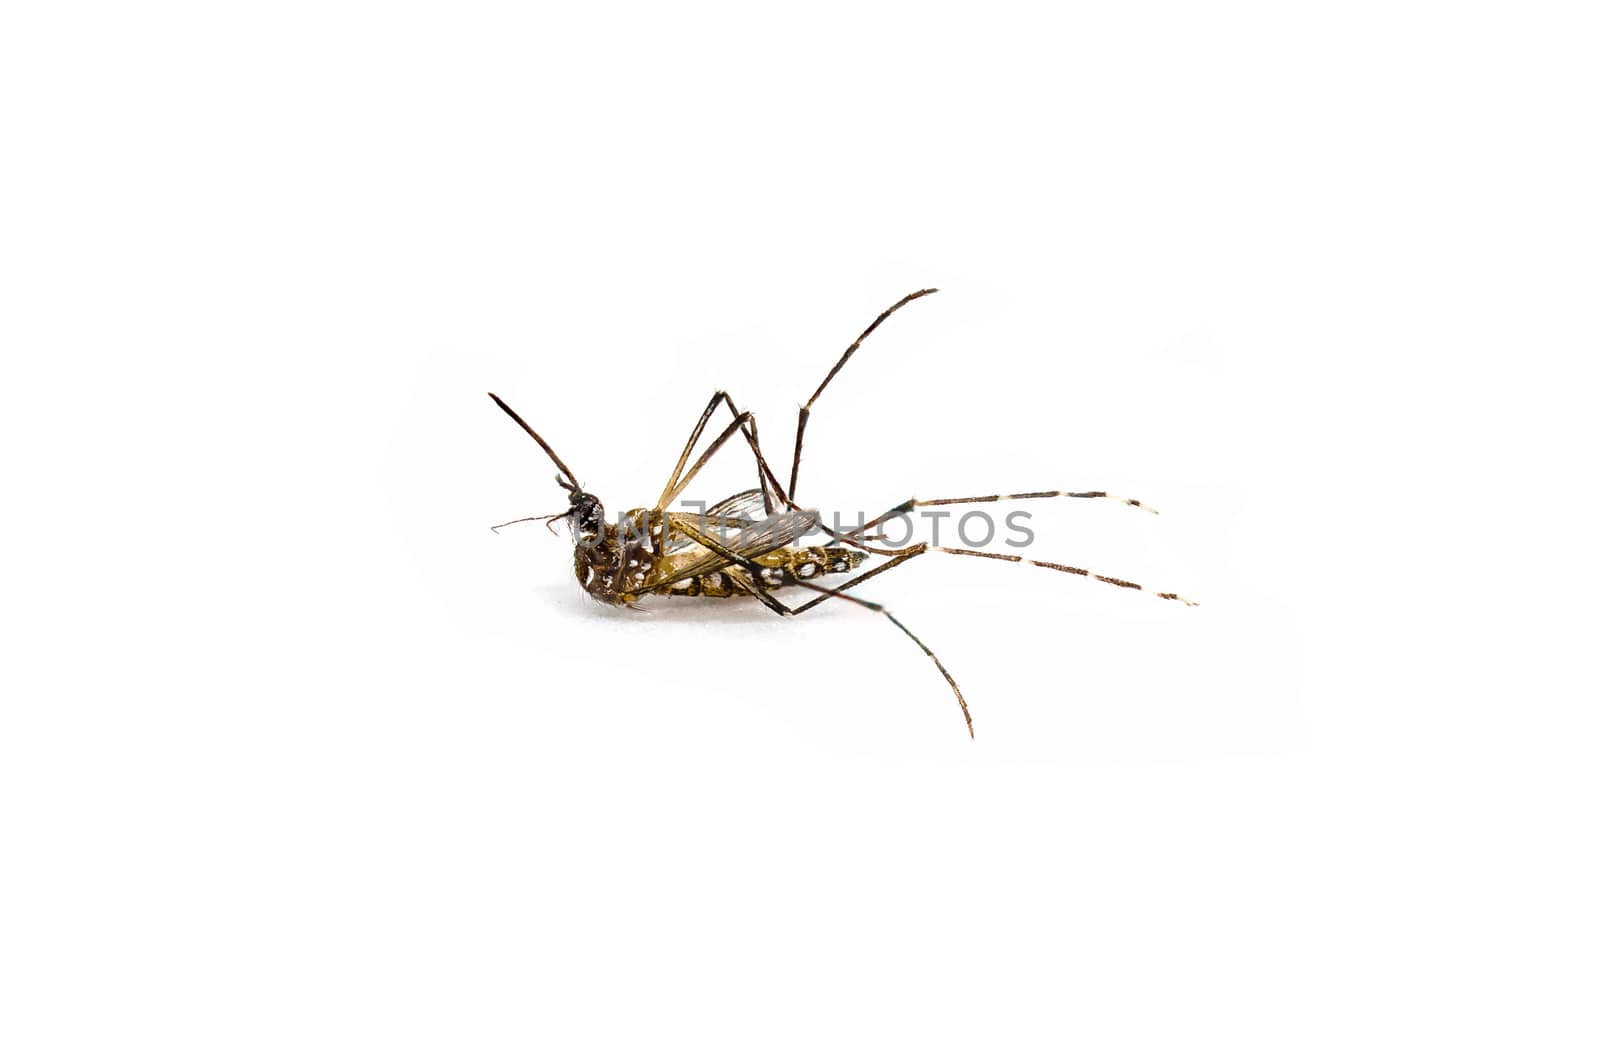 Dead mosquito on white background.